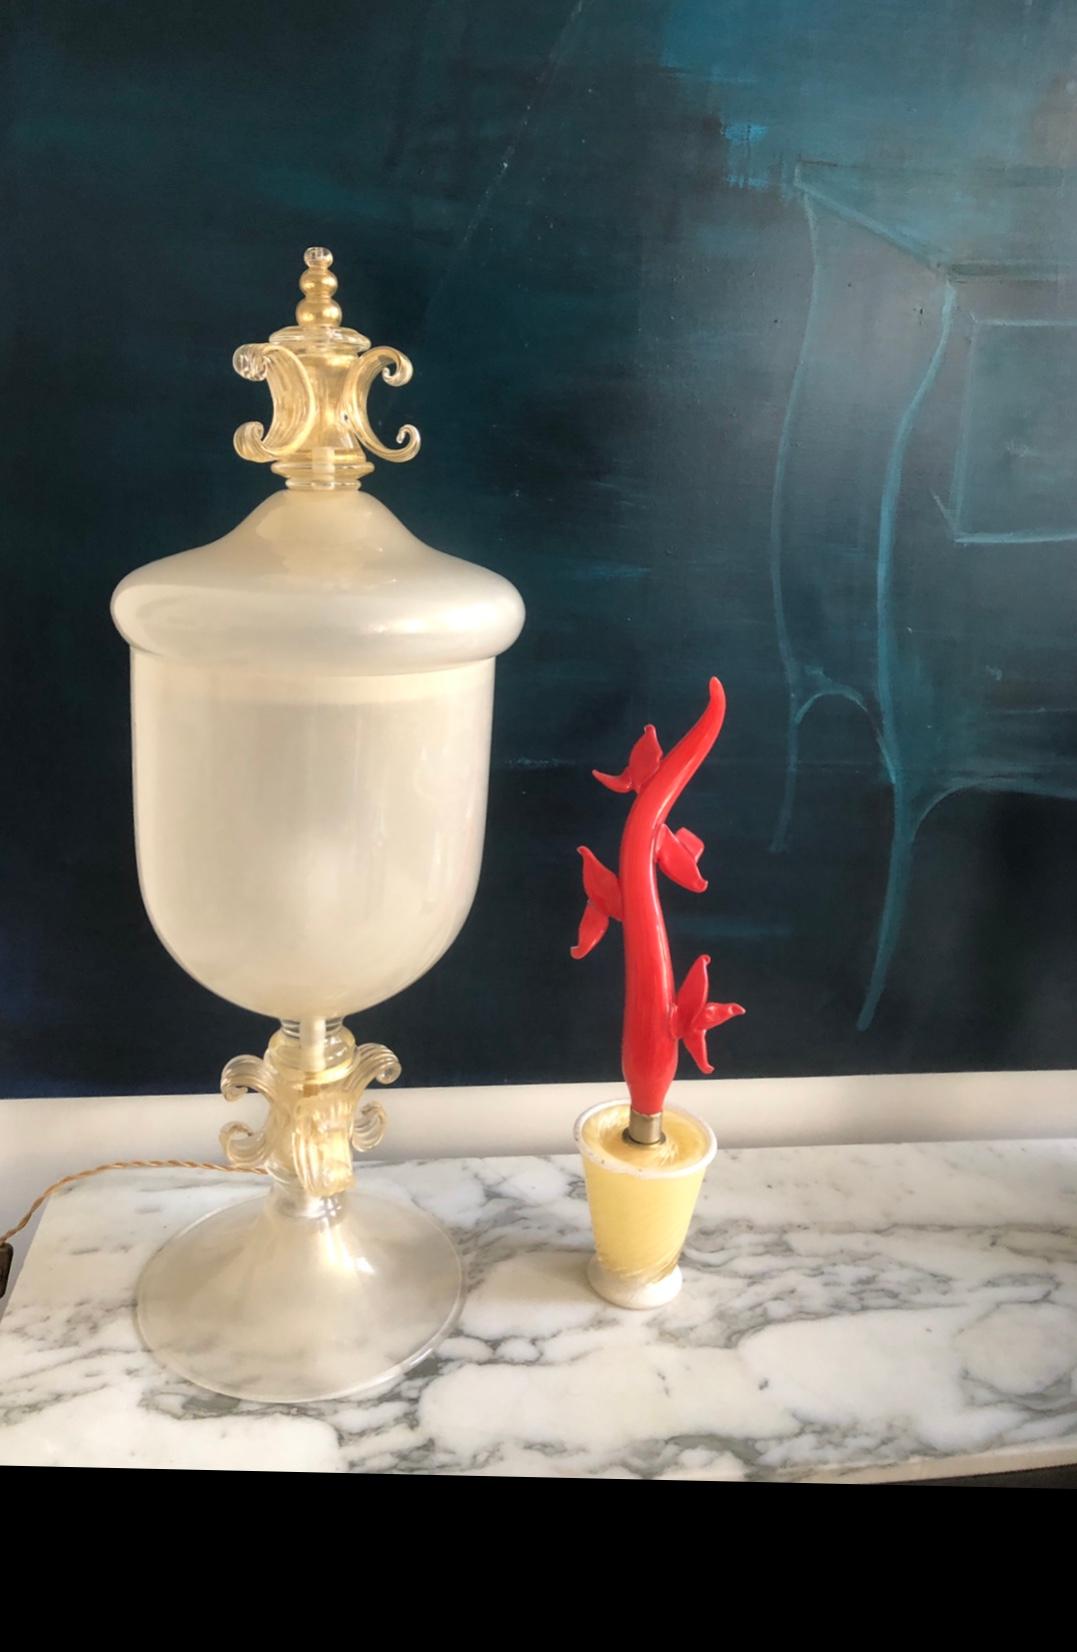 Barbini red gold flecks art Murano glass coral sculpture. Intense red coral branch and gold flecks infused on a clear glass pot. The coral has a brass ring between the branch and the pot.
THE PRICE IS FOR ONE PIECE. 
The piece has NO damage (chips,